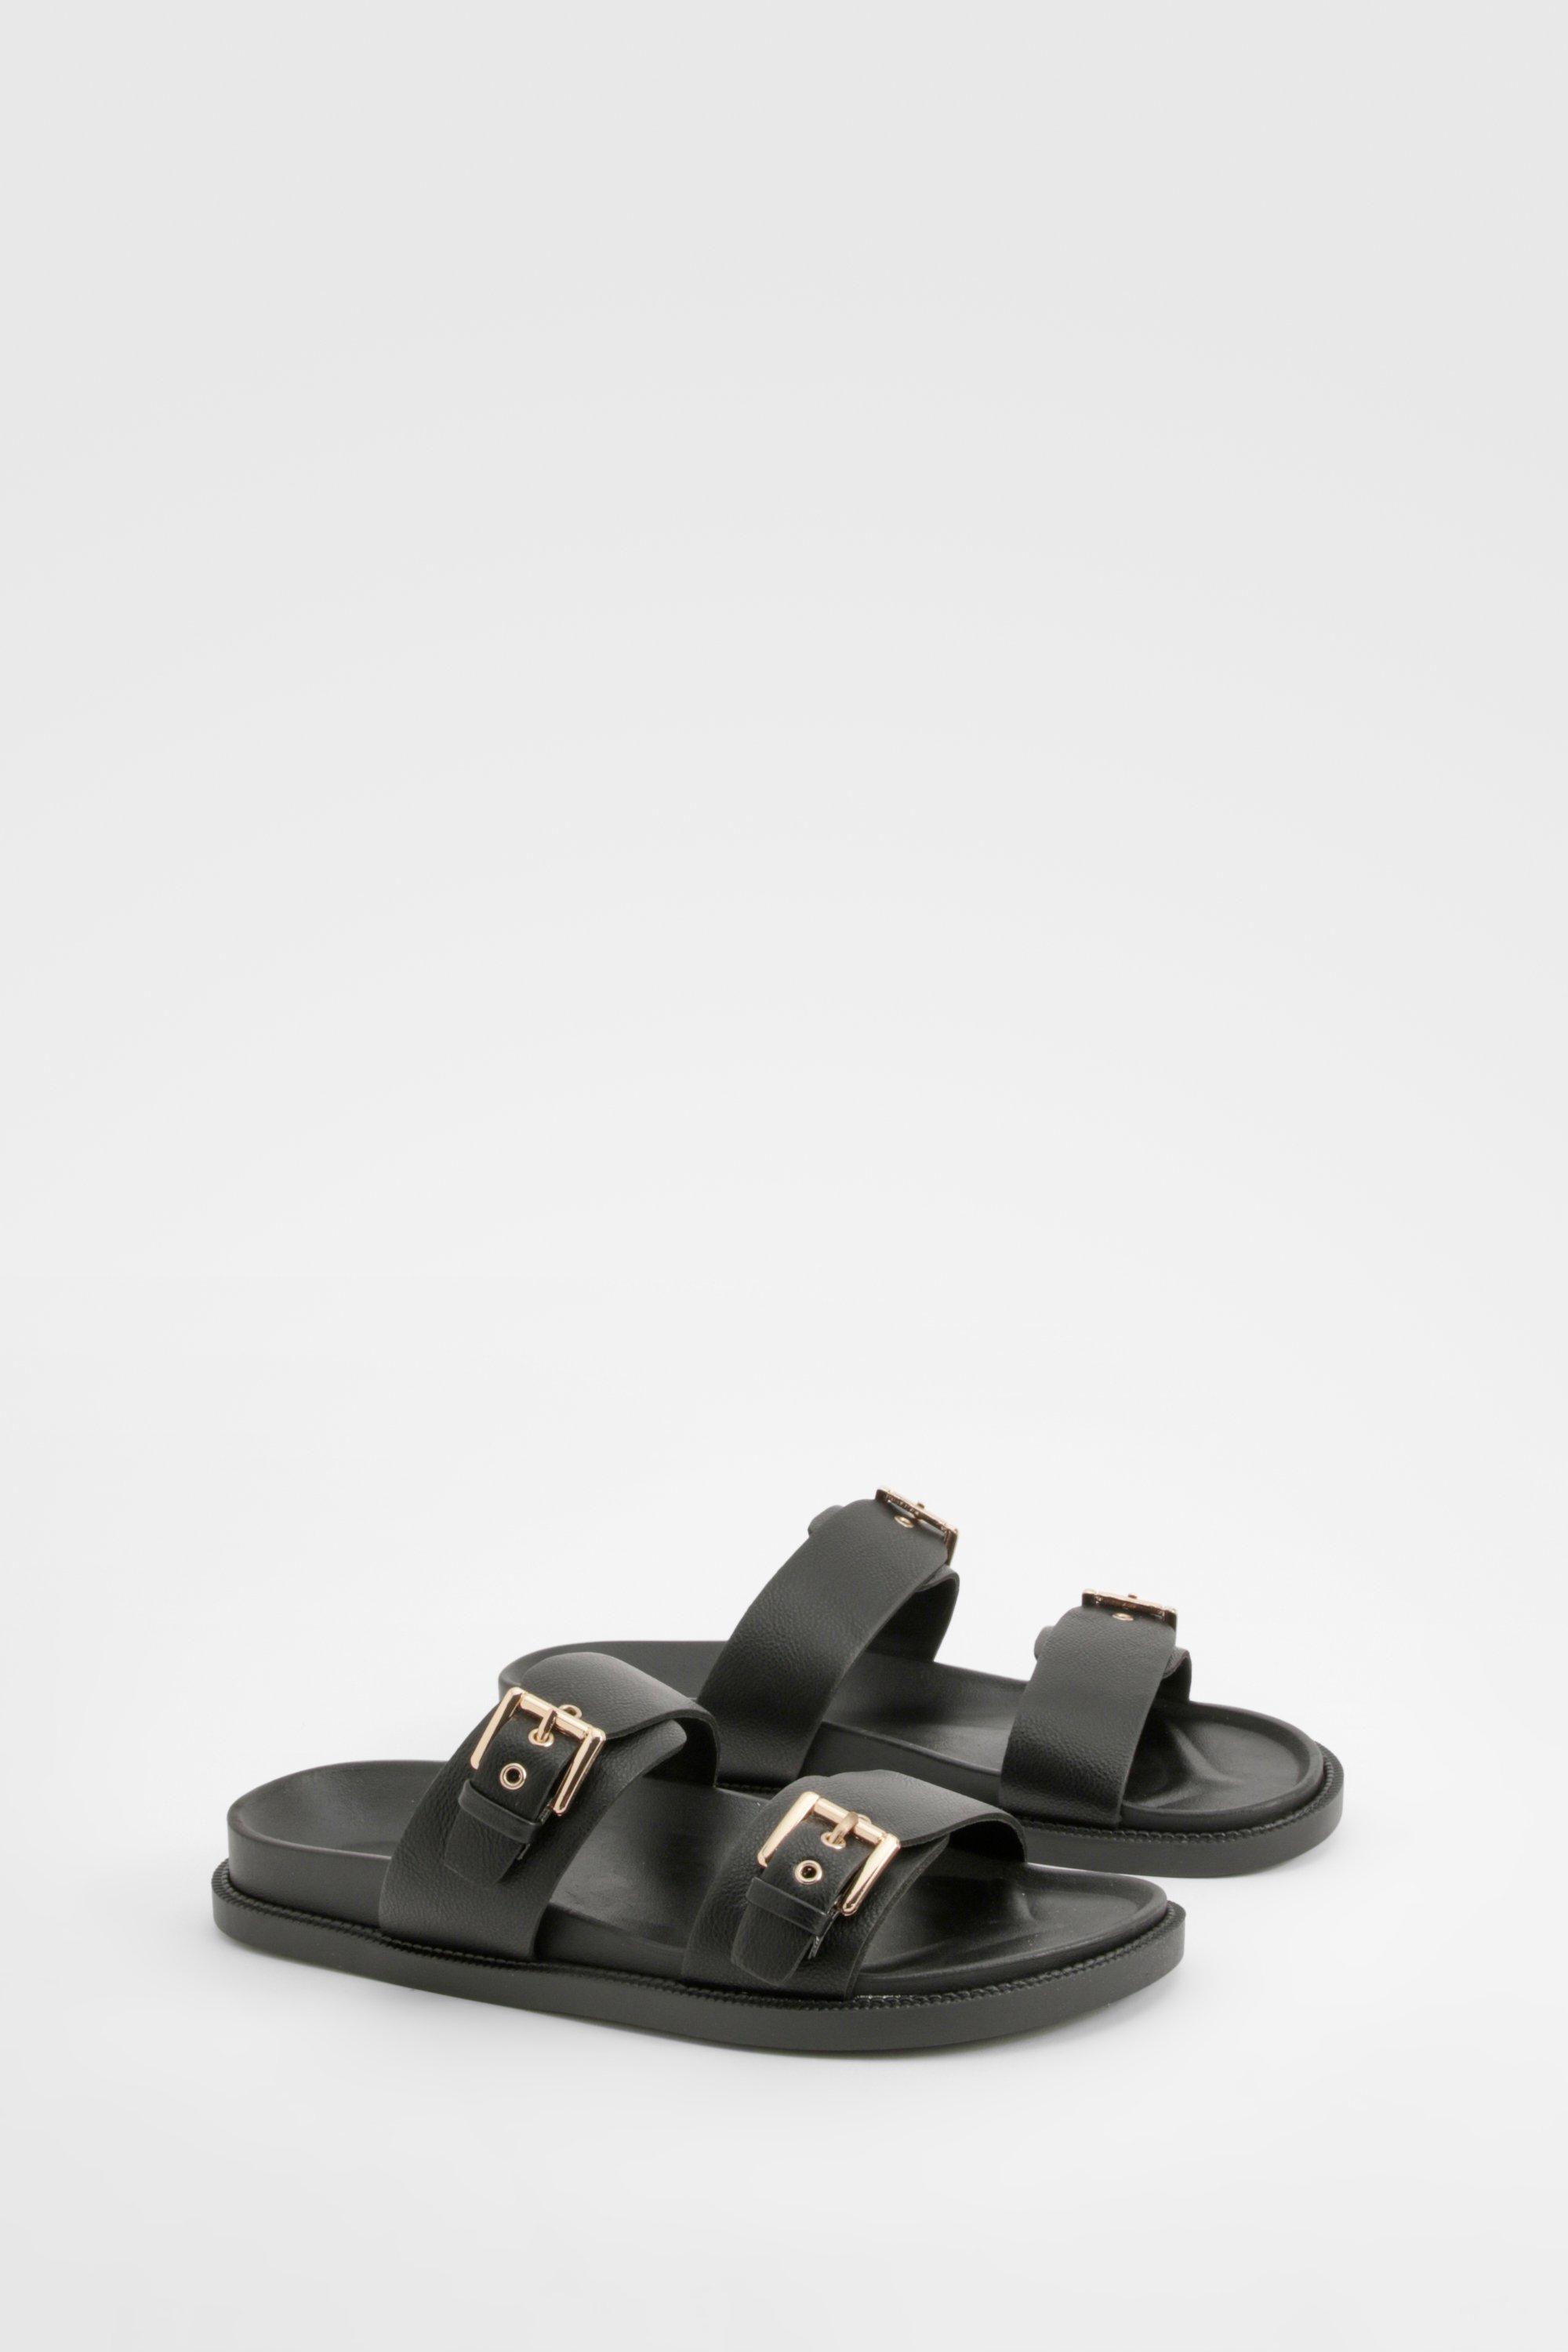 Image of Double Strap Footbed Buckle Sliders, Nero